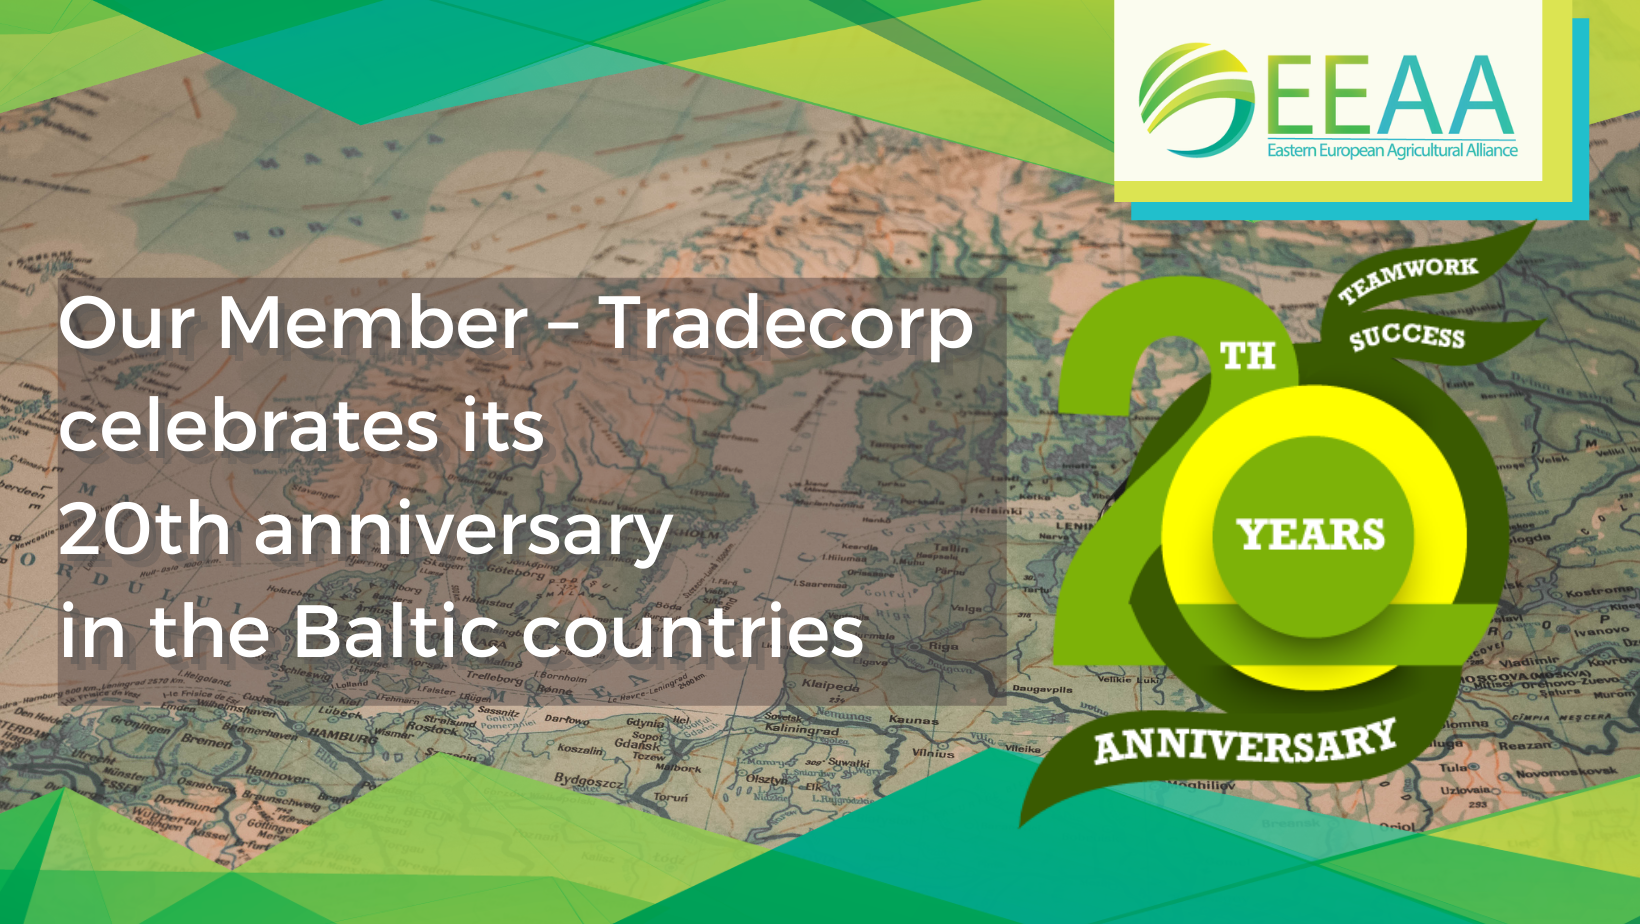 Tradecorp celebrates its 20th anniversary in the Baltic countries